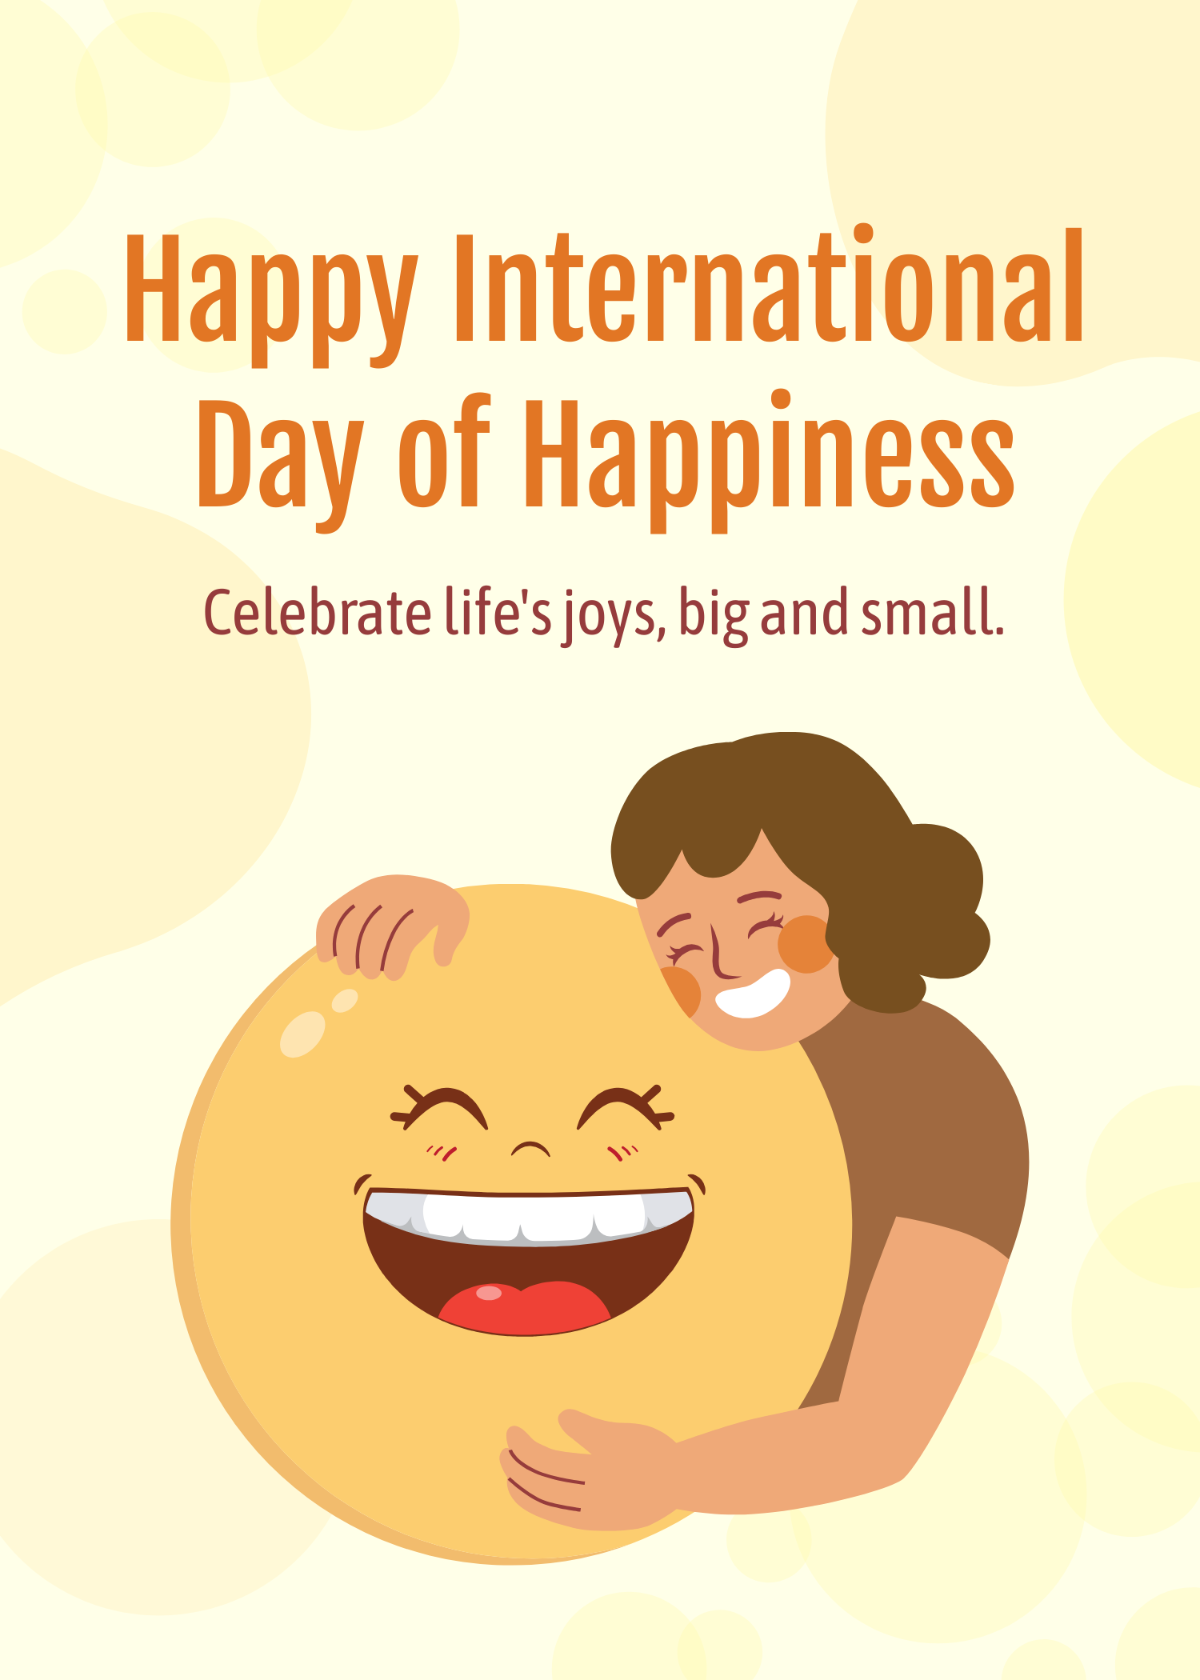 International Day of Happiness Greeting Card Template